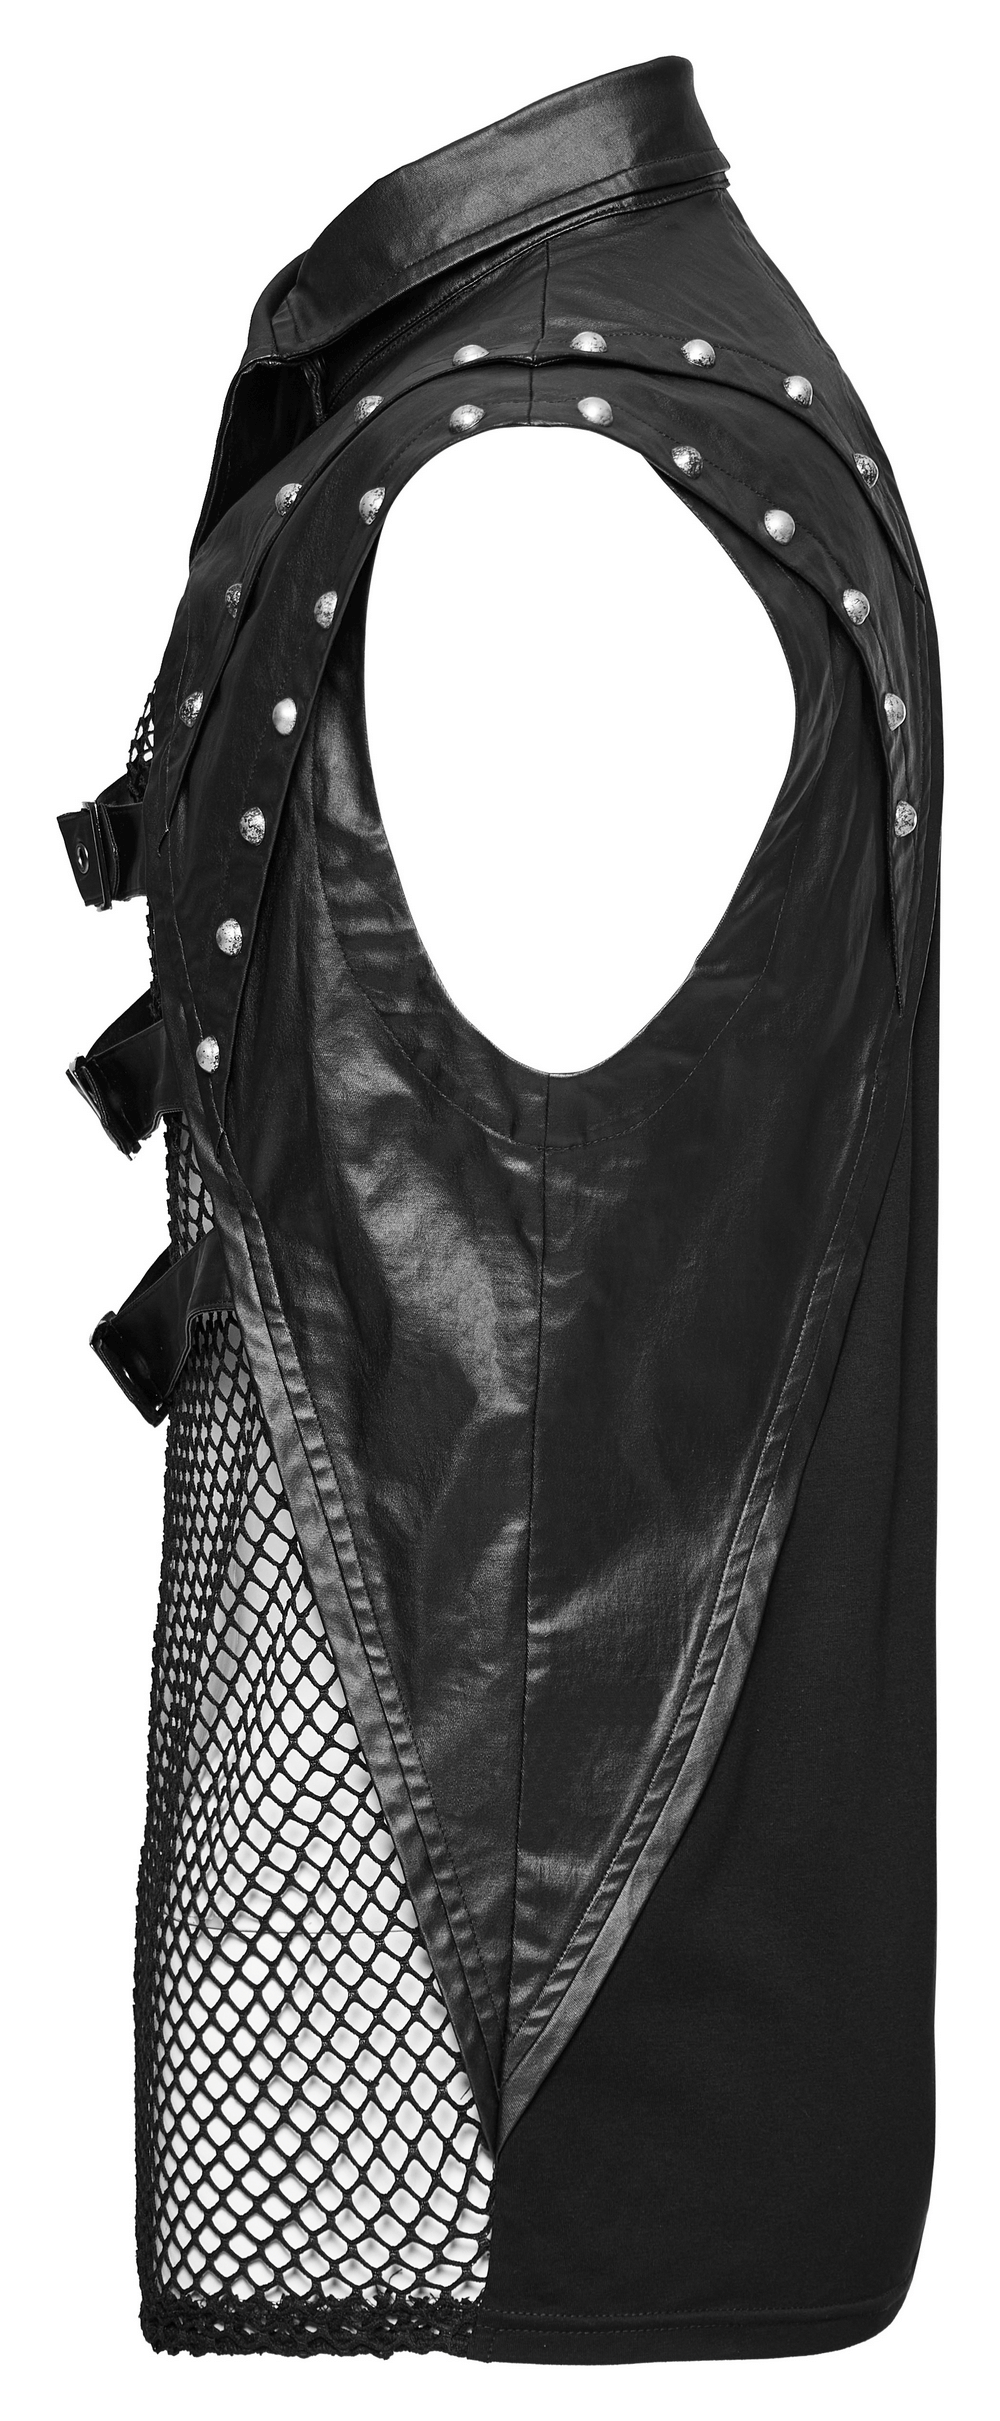 Stylish Men's Gothic Mesh Top with Rivets and Buckles